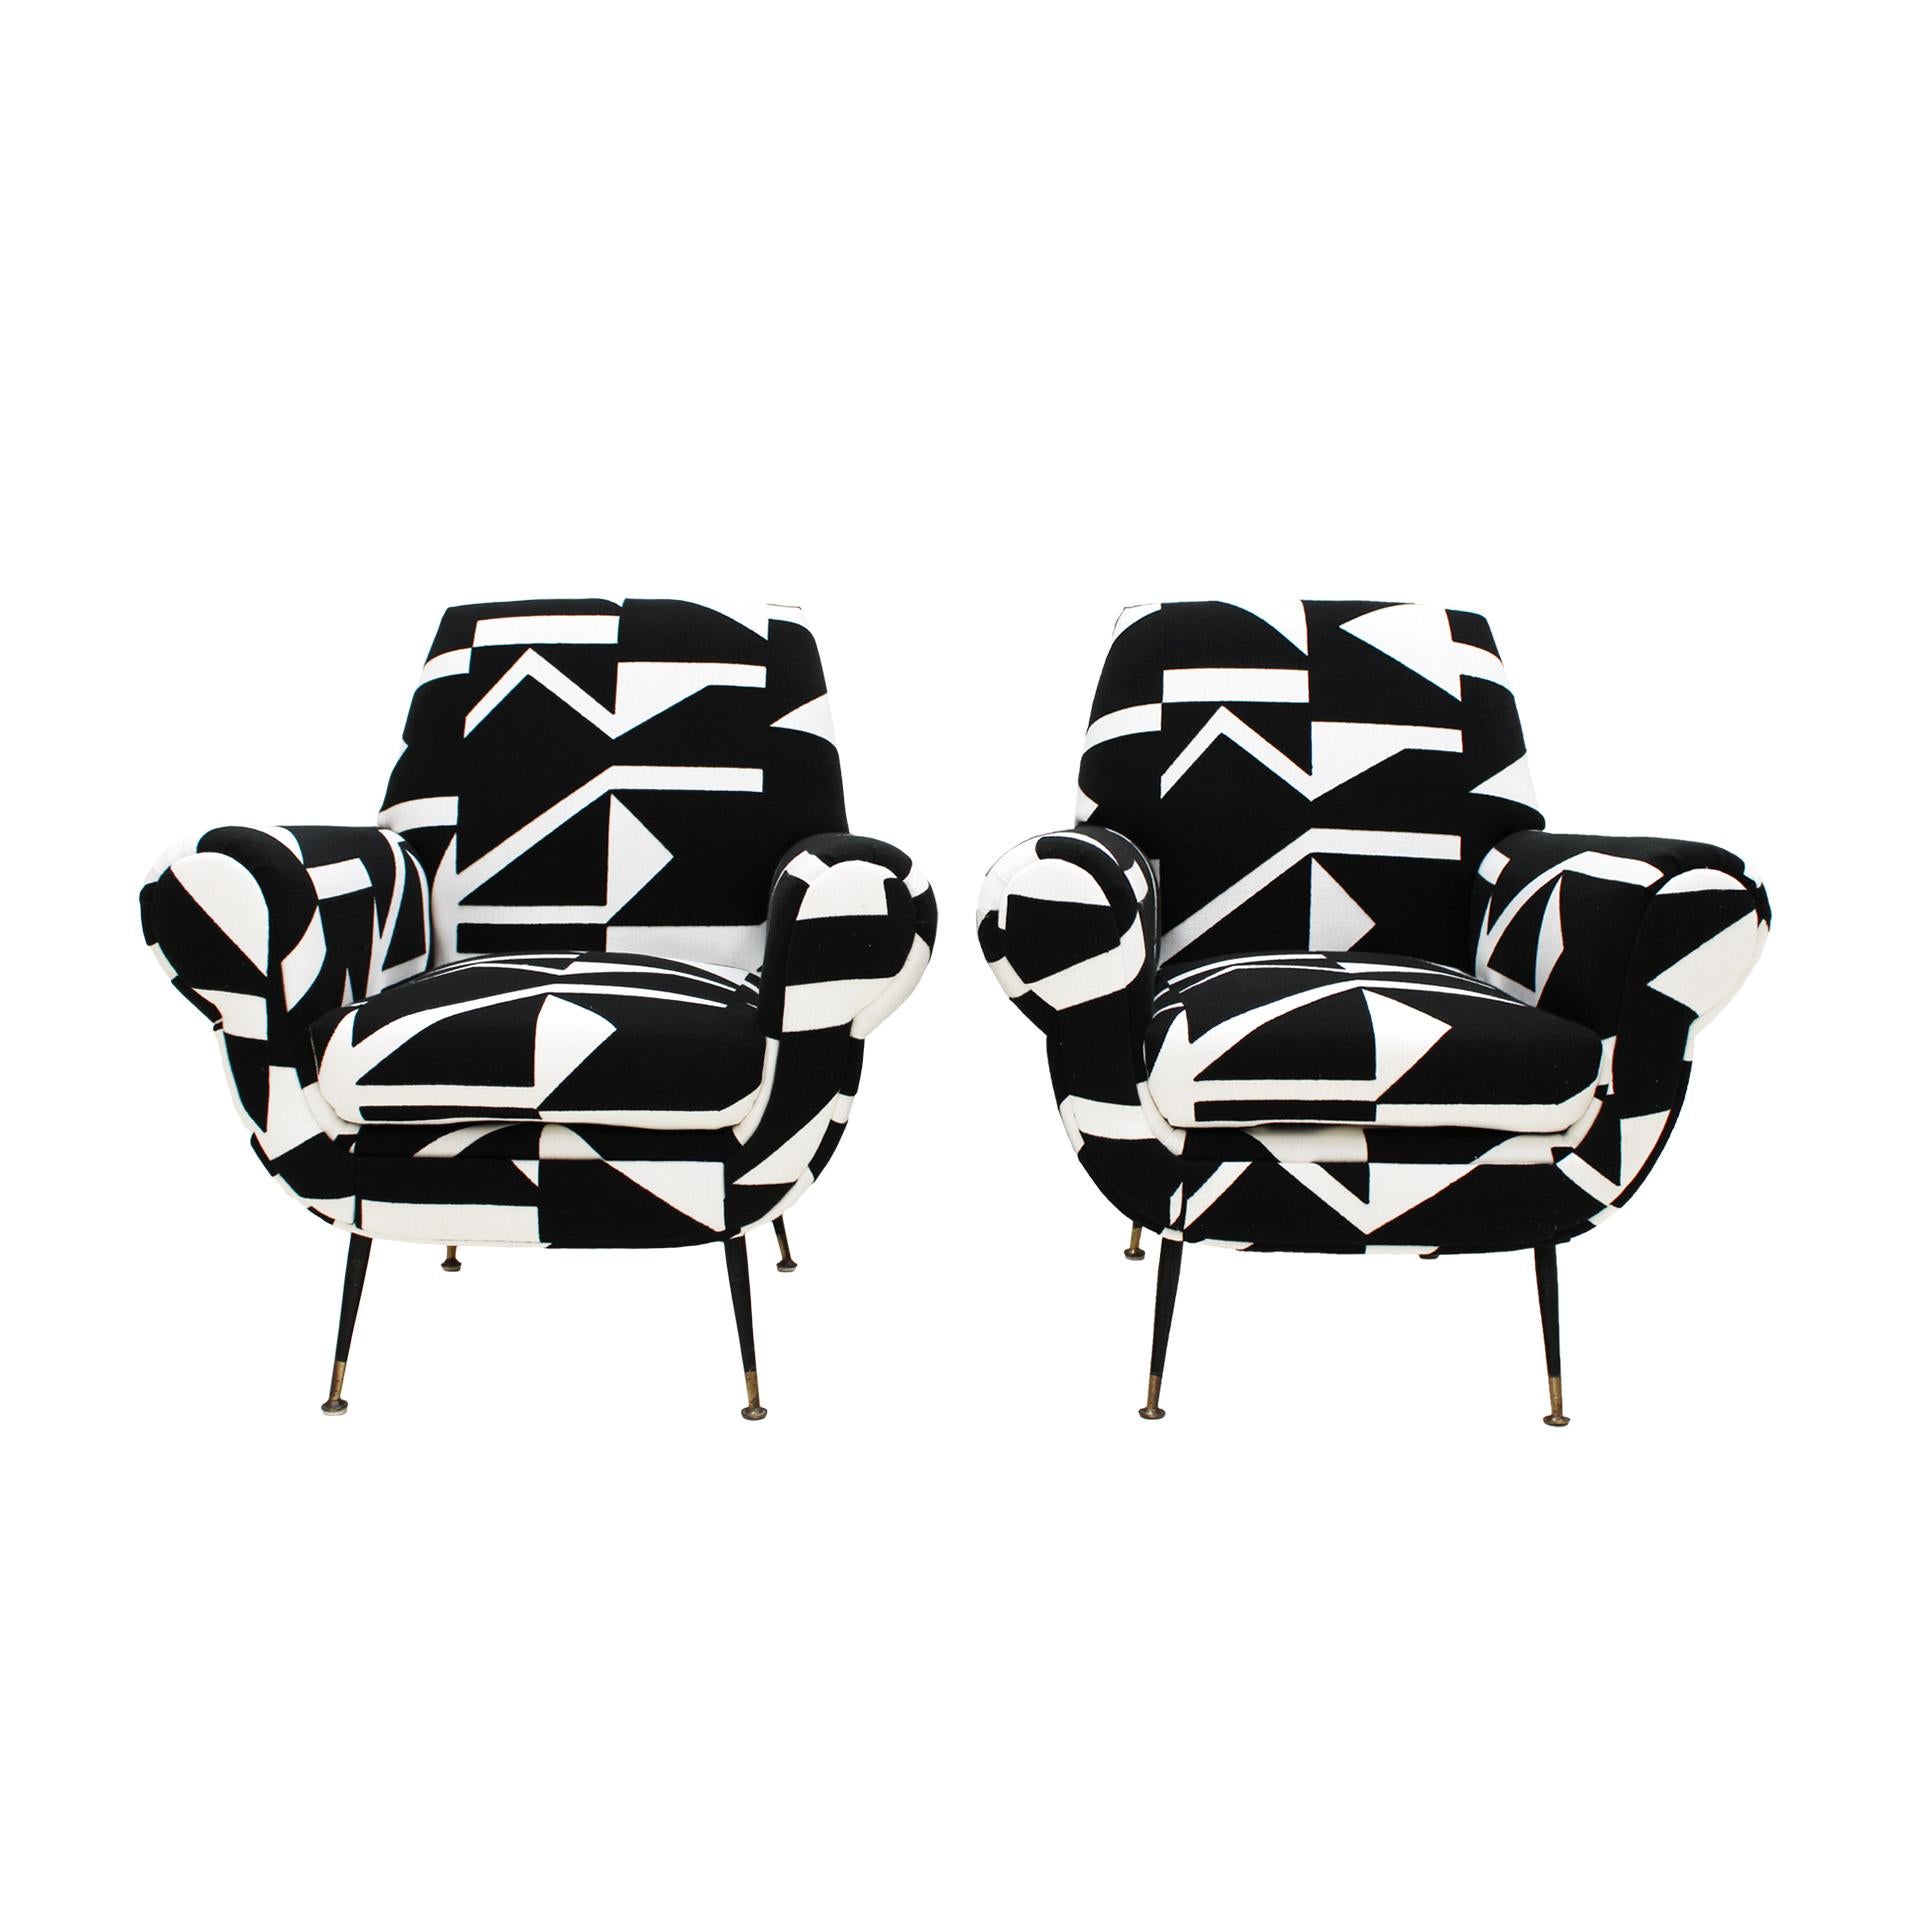 Pair of comfortable armchairs designed by Gigi Radice and produced in Italy in 1950. Structure made of solid wood standing on black metal tapered legs and brass feet. Linen upholstery with geometric embroidery from the 